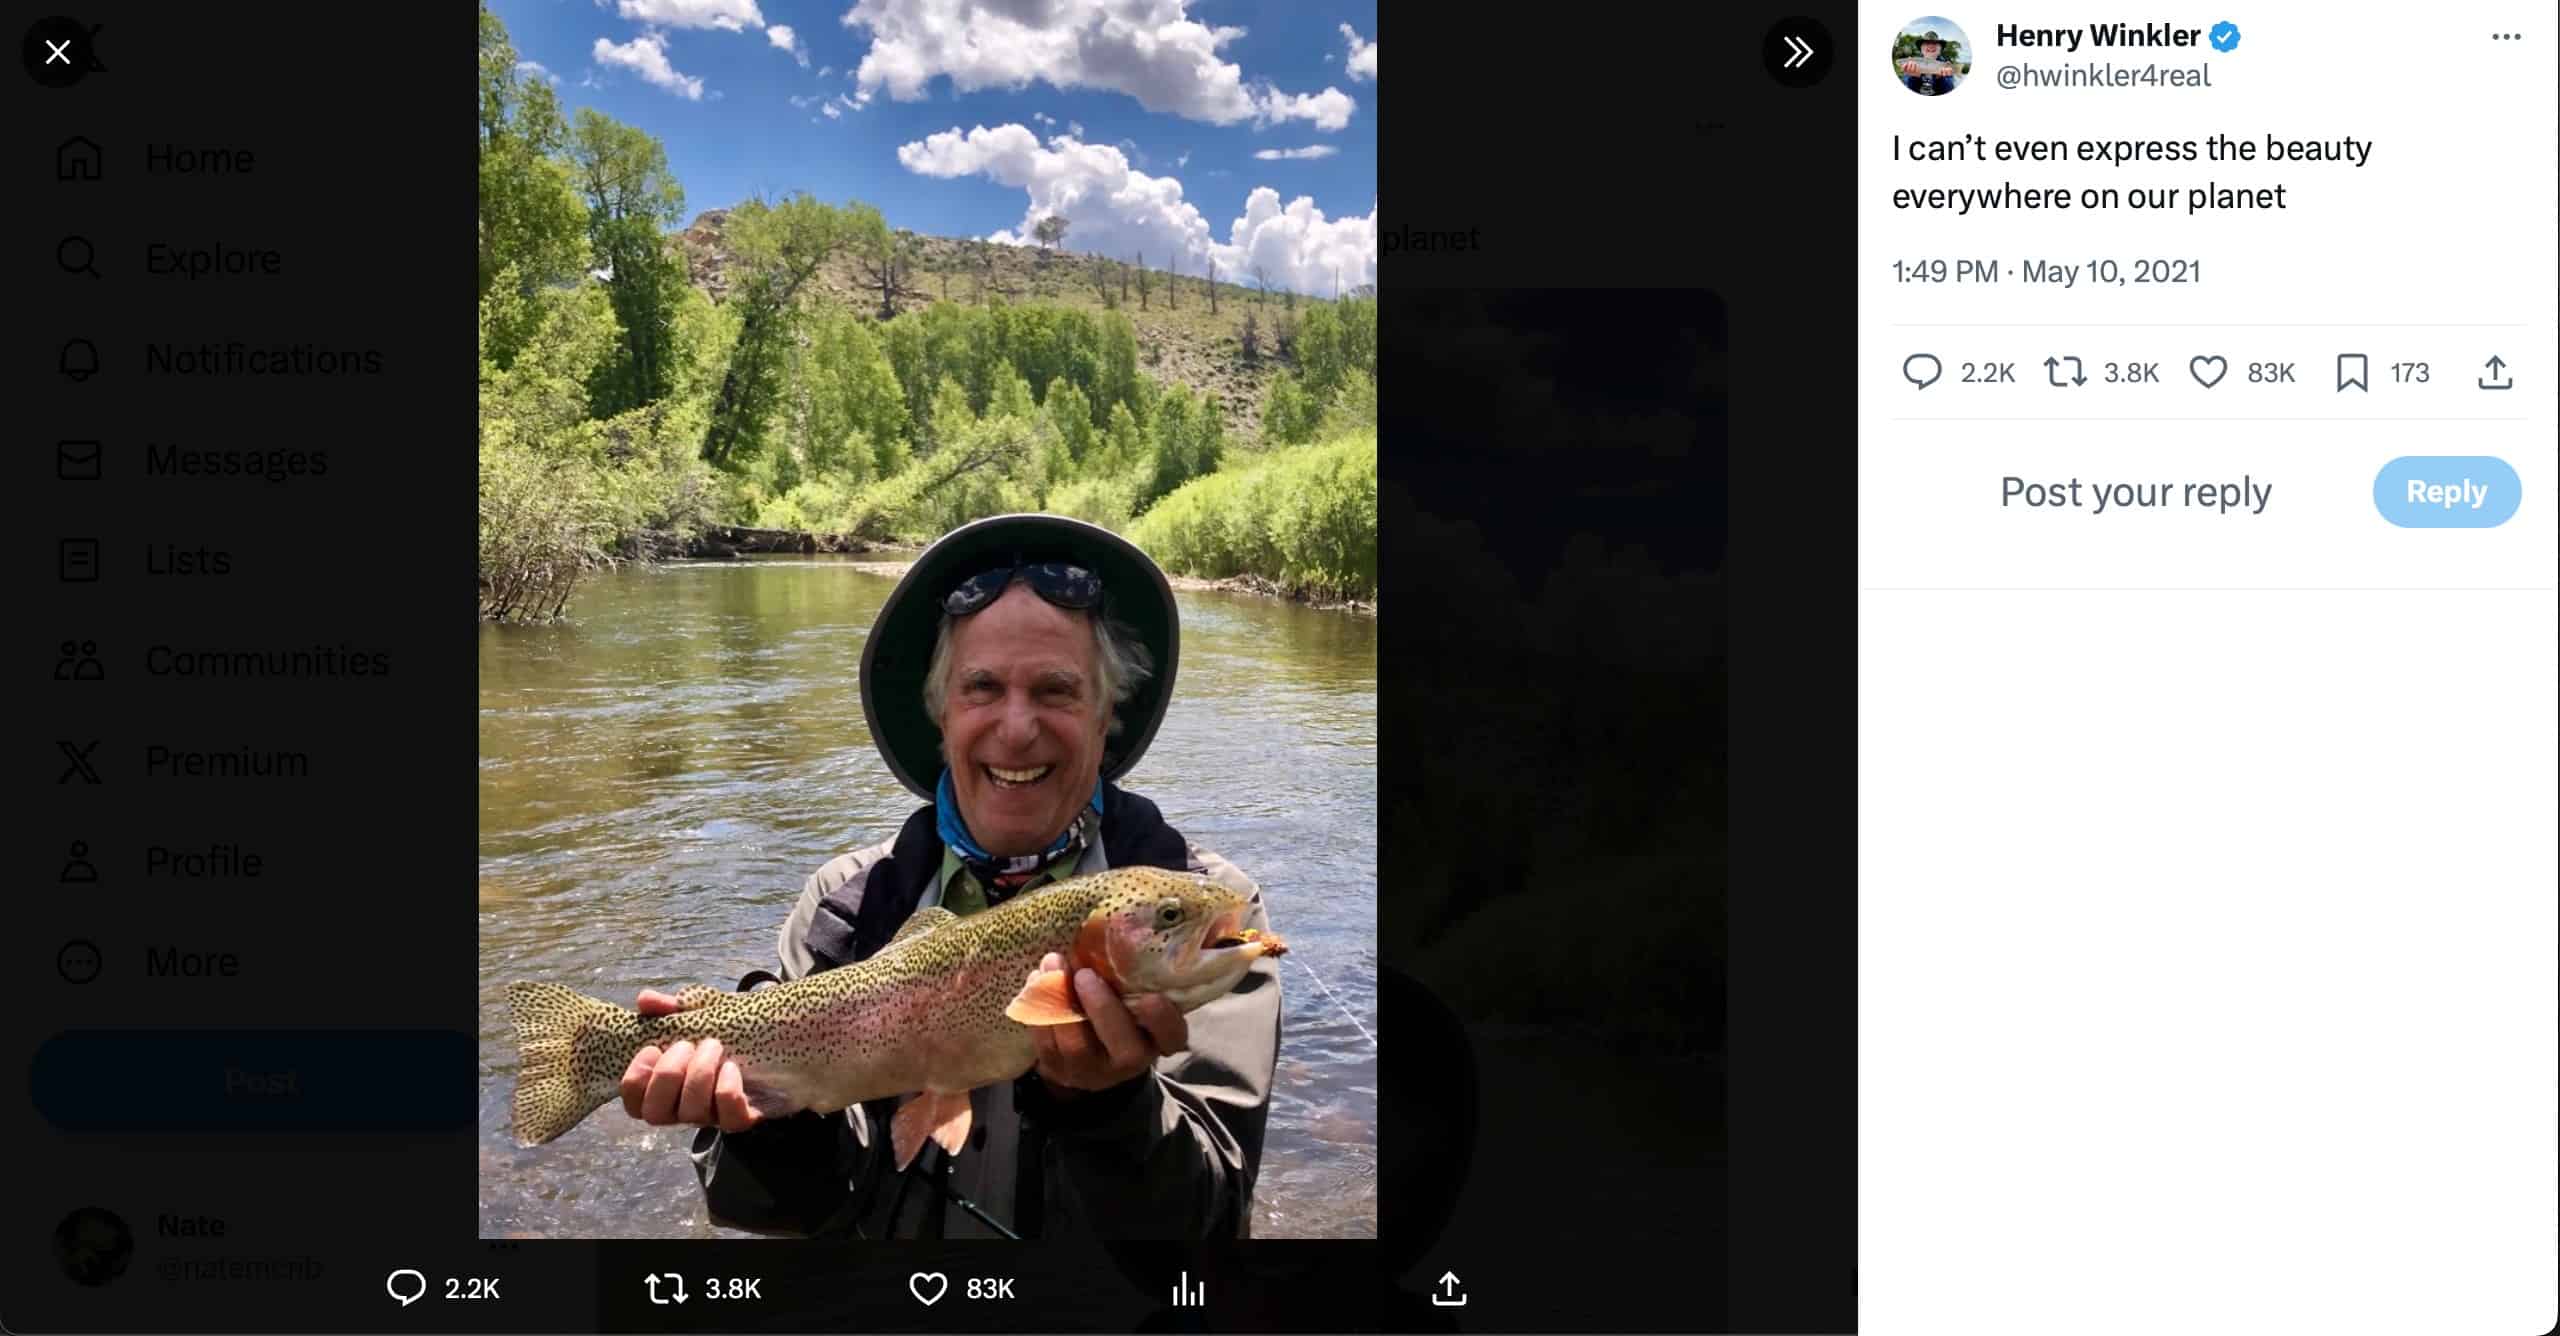 Henry Winkler with a fish he caught and posted on Twitter.